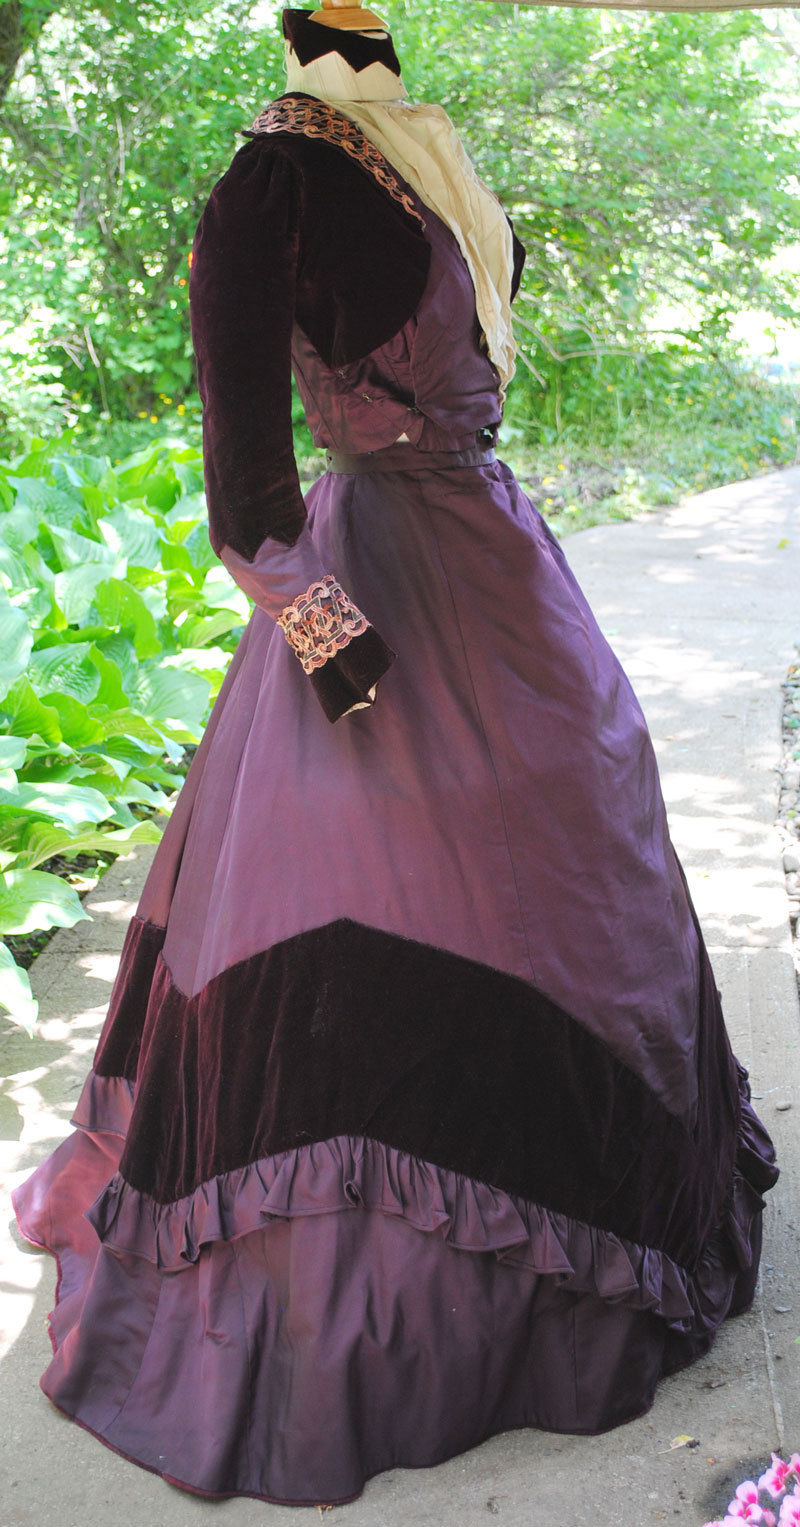 All The Pretty Dresses: Lovely Edwardian Purple and White Dress